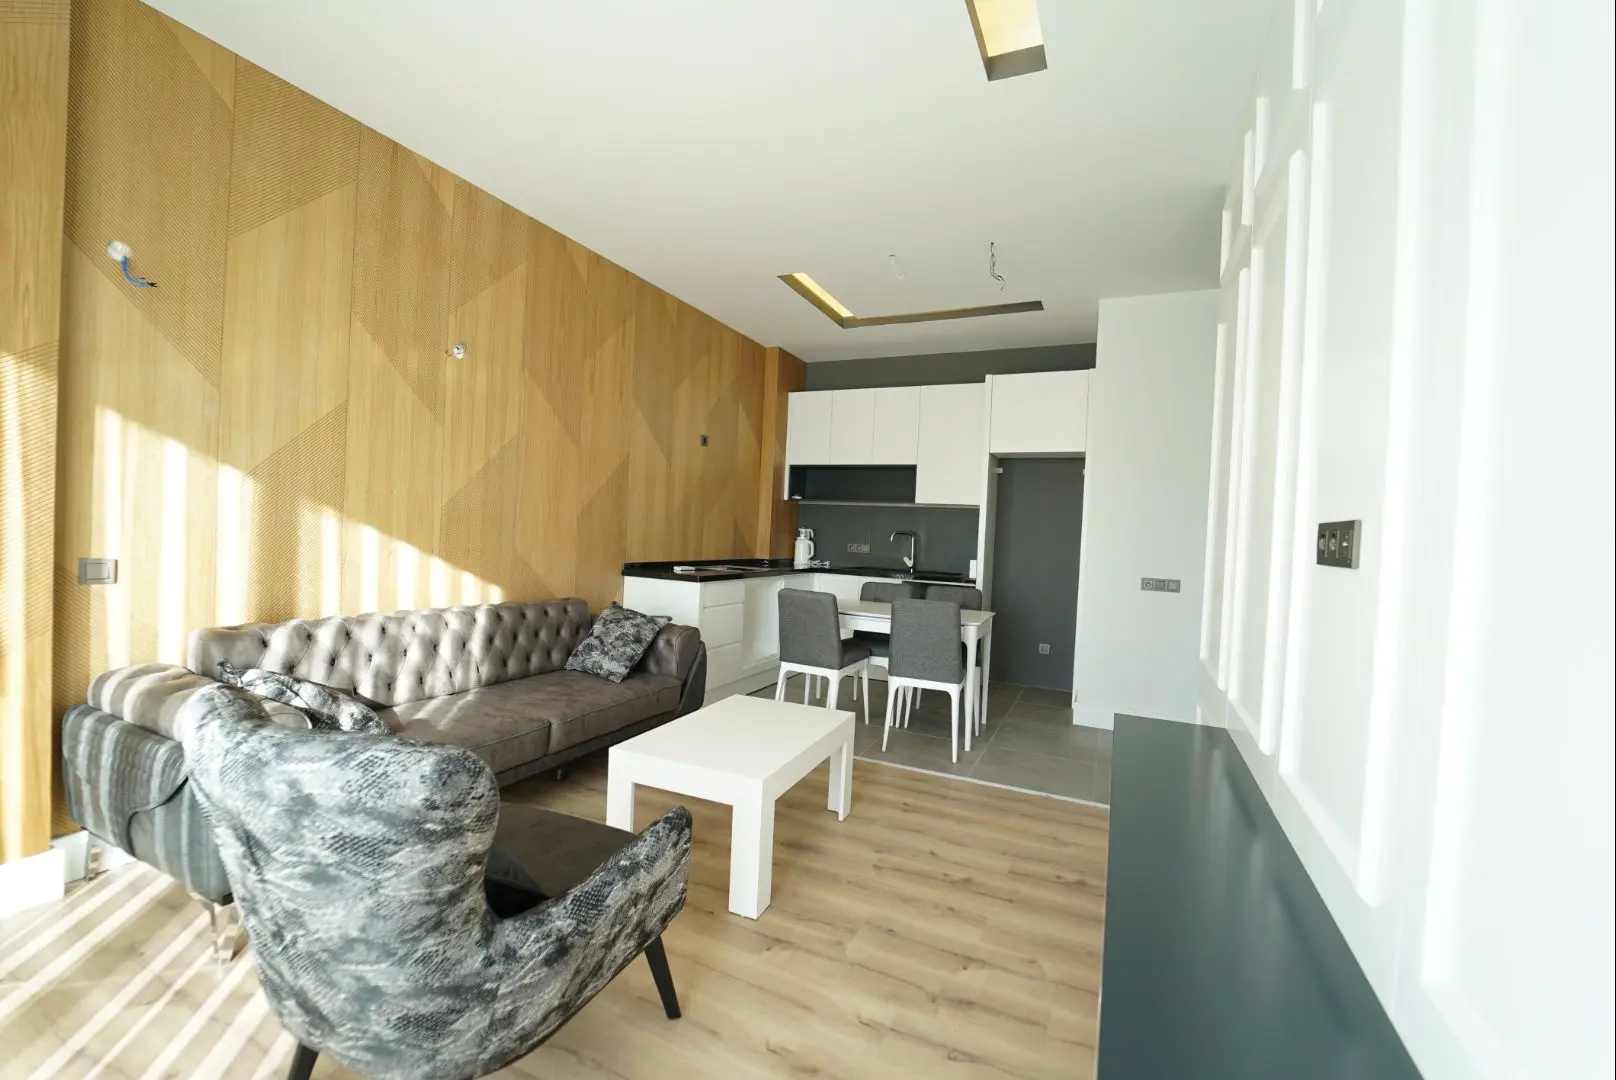 NEW AND FURNISHED 1+1 FLAT IN A WONDERFUL LOCATION IN DAMLATAŞ